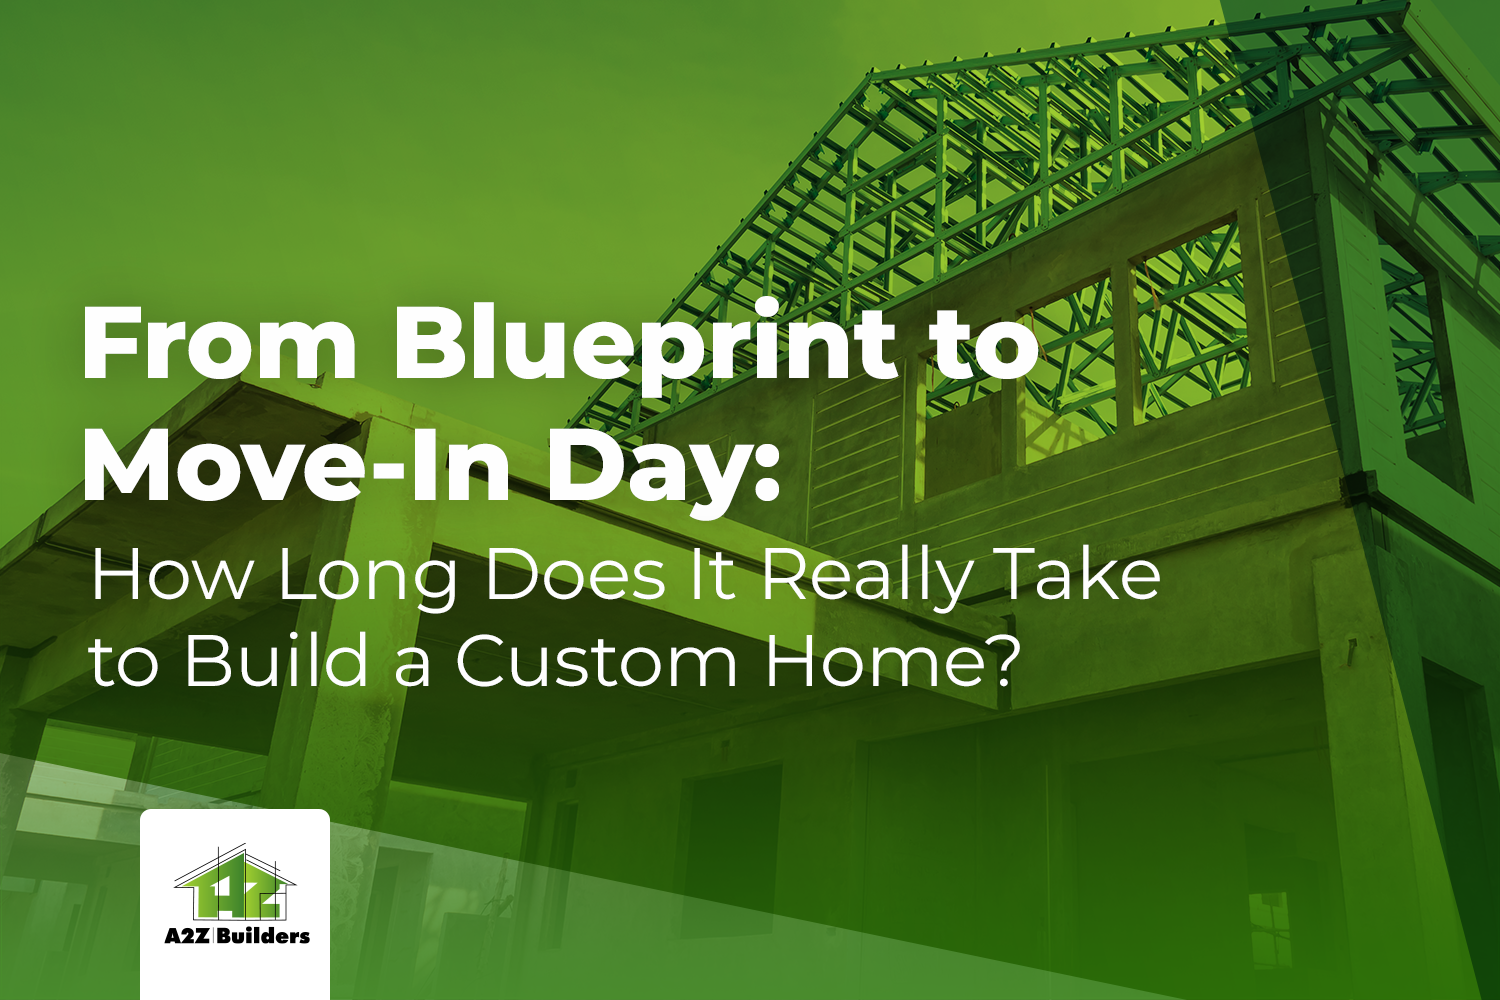 How long does it take to build a custom home?